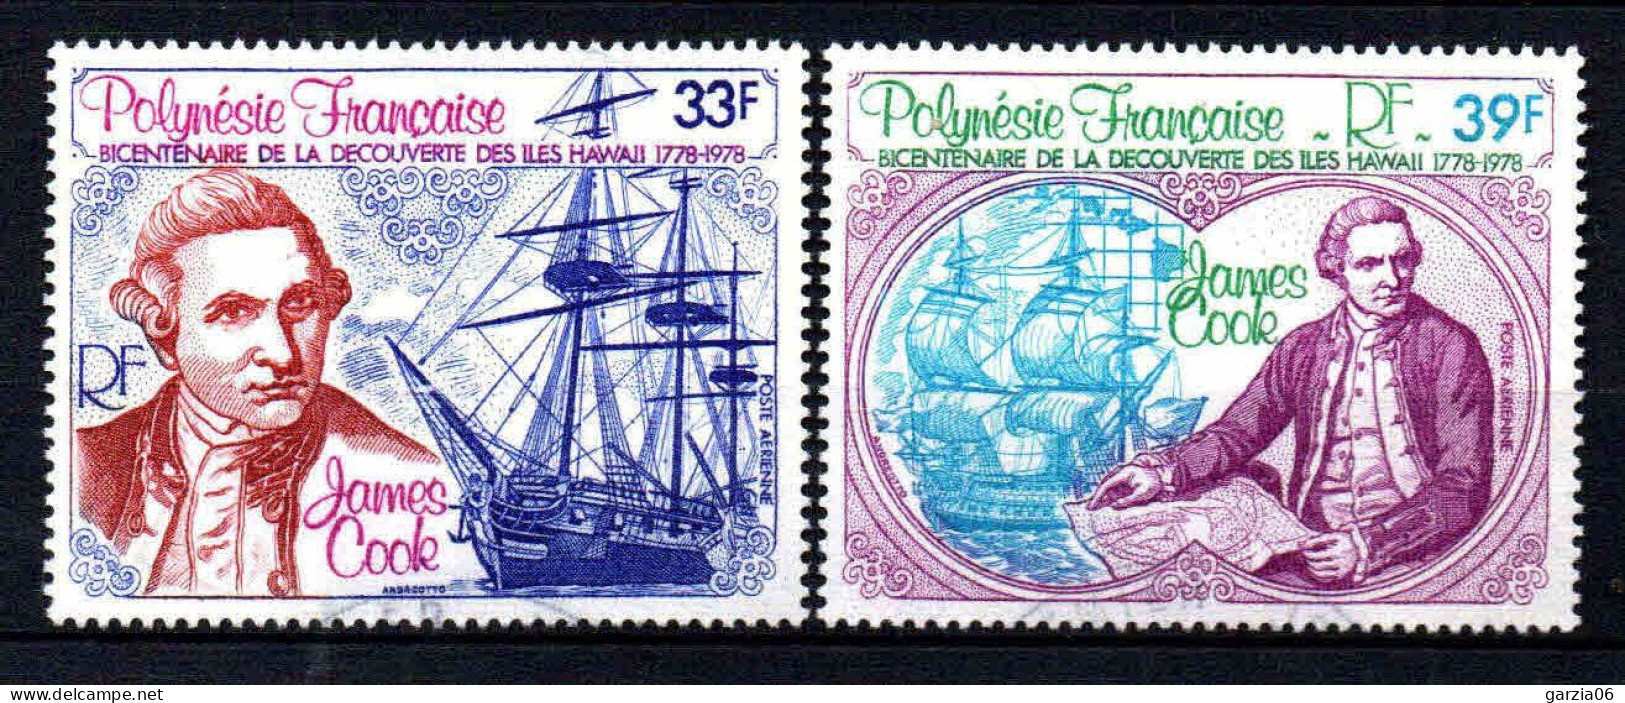 Polynésie - 1978  - James Cook  -  PA 130/131   - Oblit - Used - Used Stamps